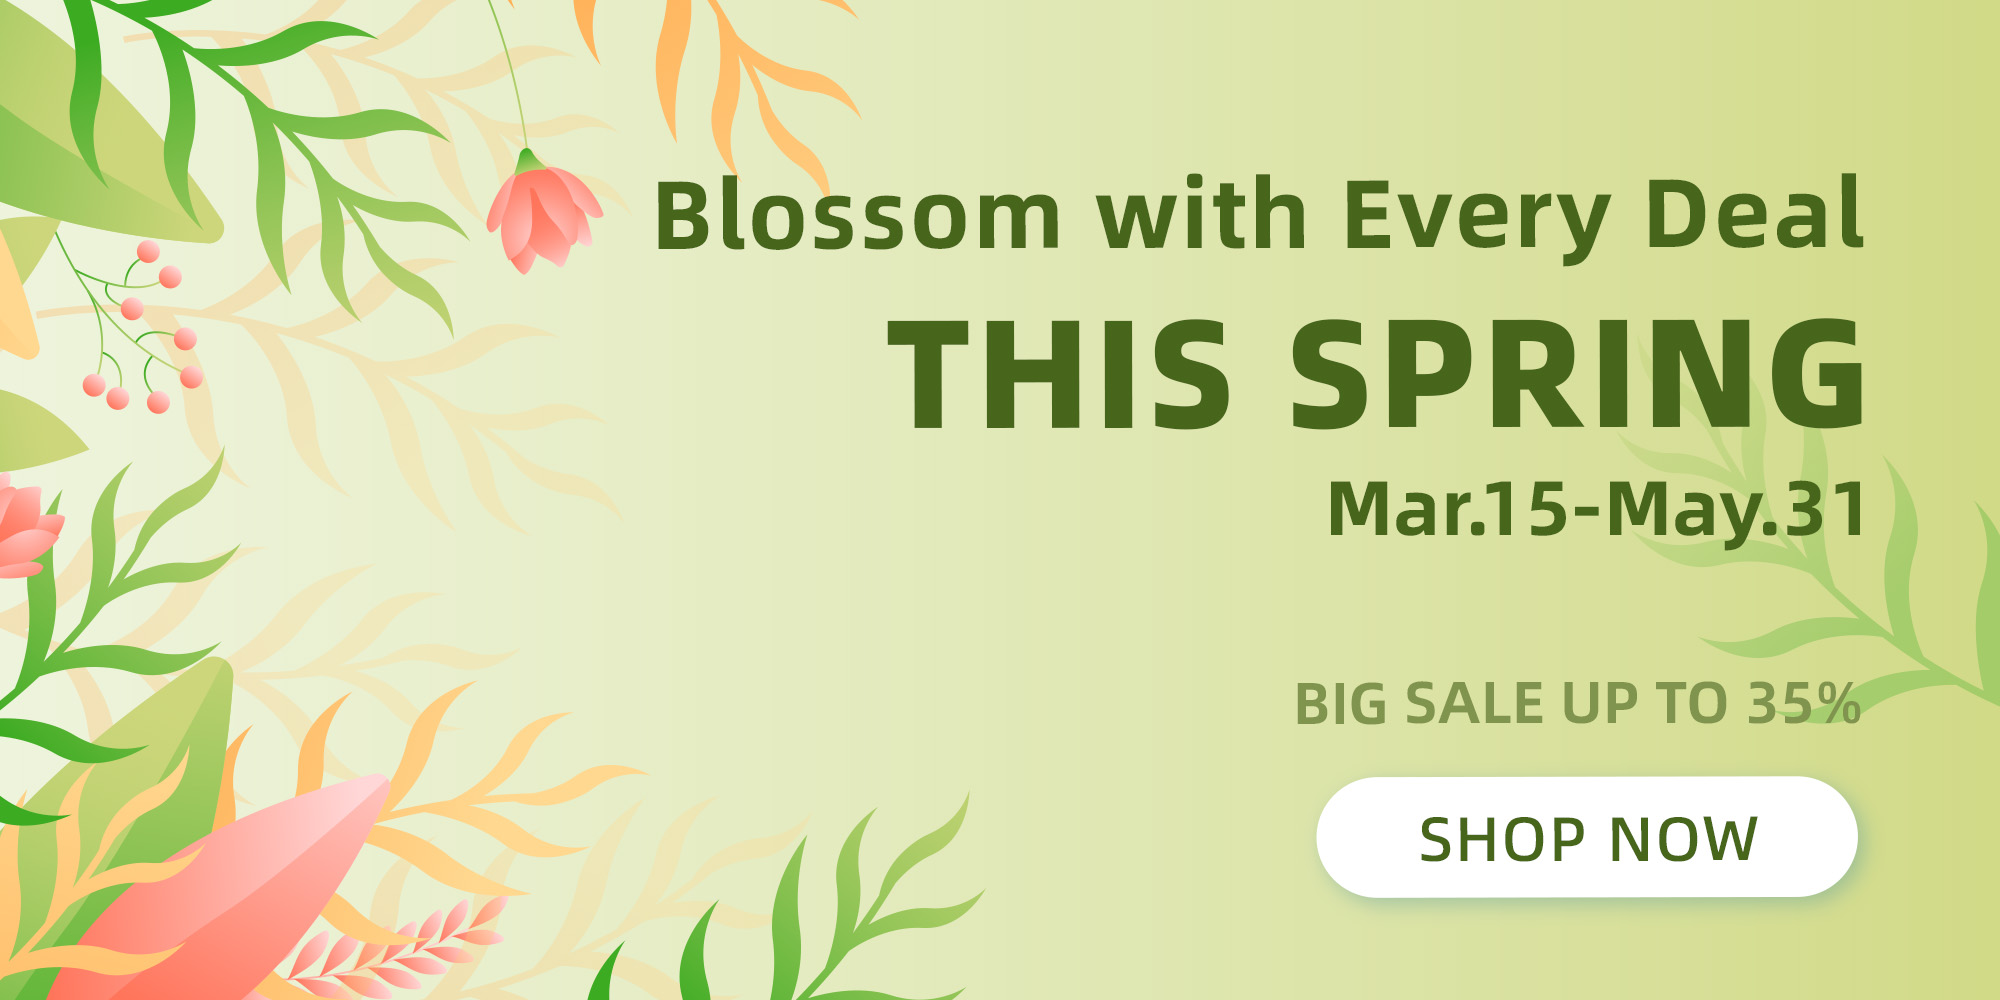 Blossom with every Deal this spring